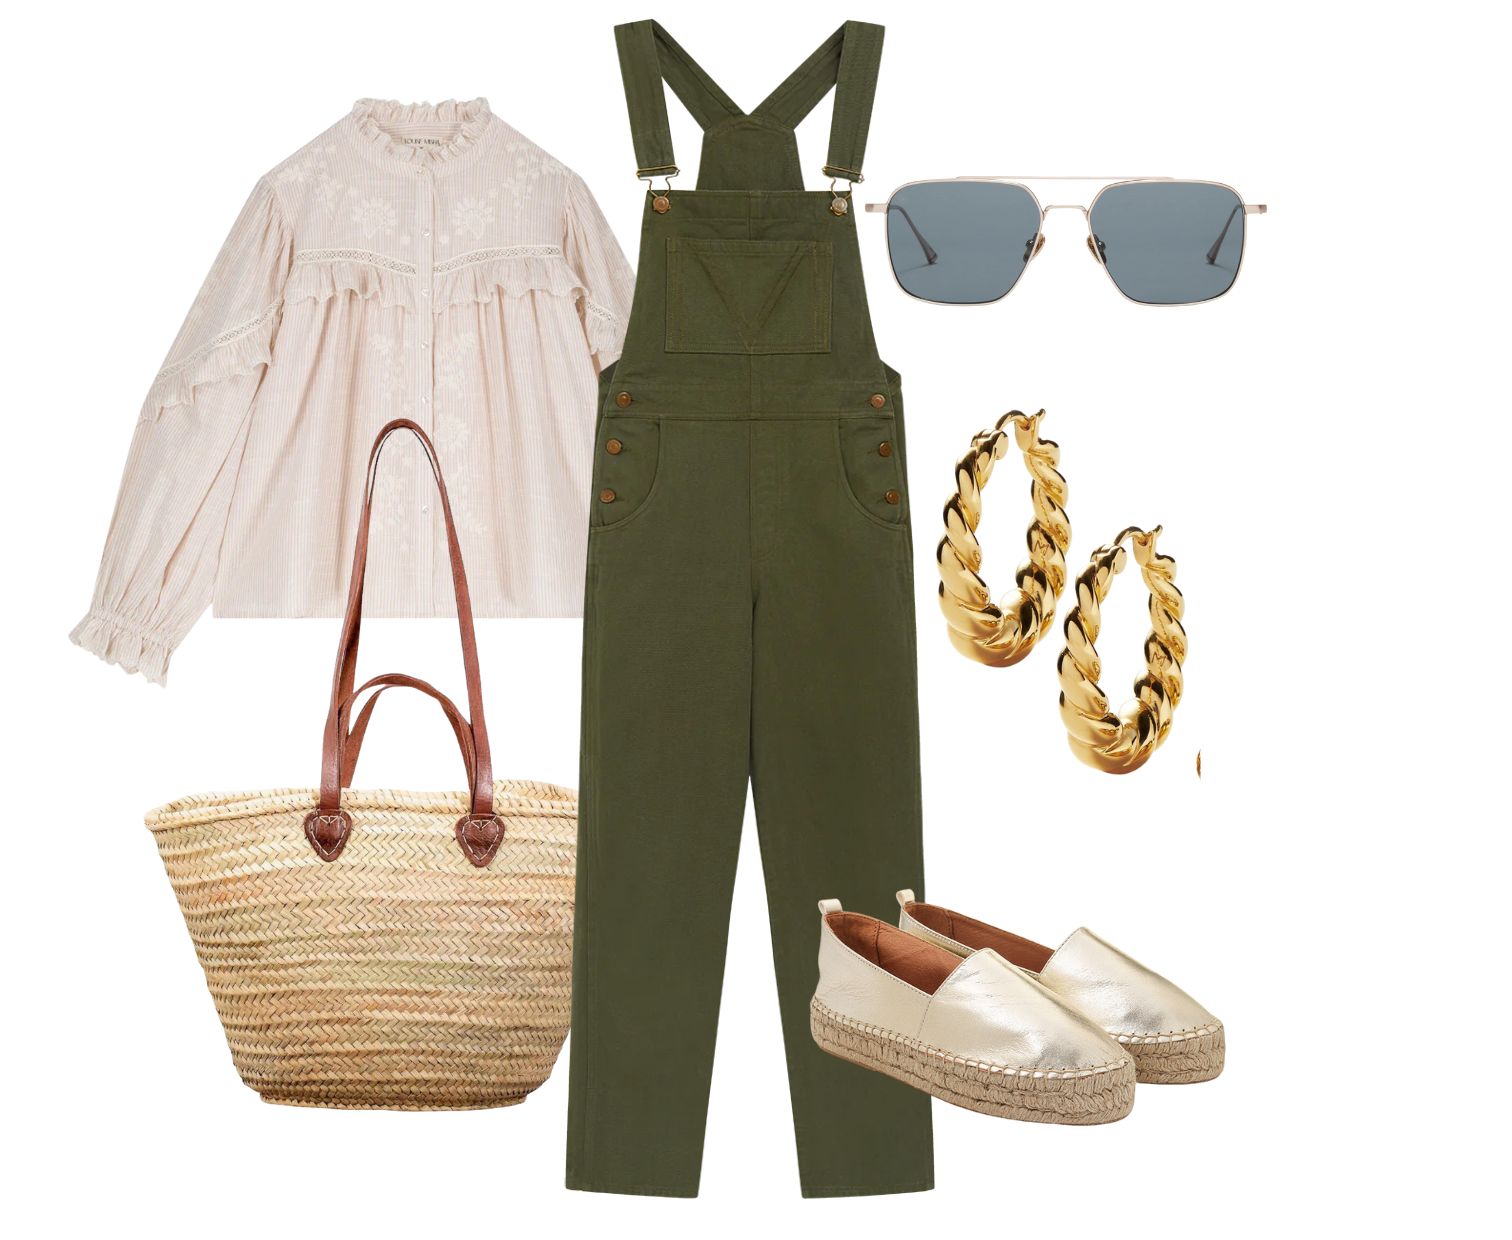 Luna Metallic Leather Espadrilles - Dida Ritchie - outfit inspiration